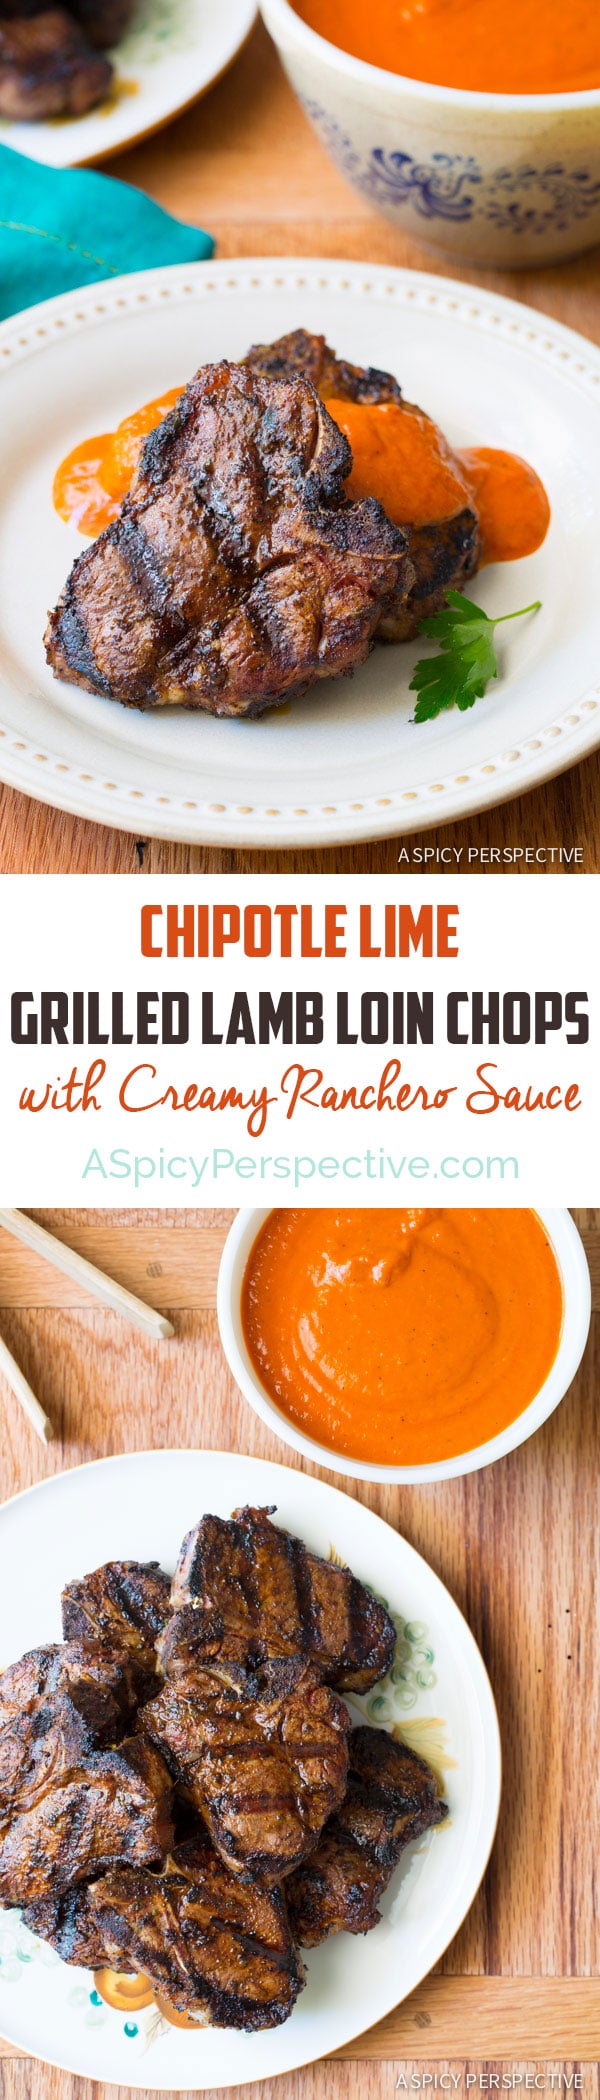 Easy Chipotle Lime Grilled Lamb Chops with Ranchero Sauce #Recipe